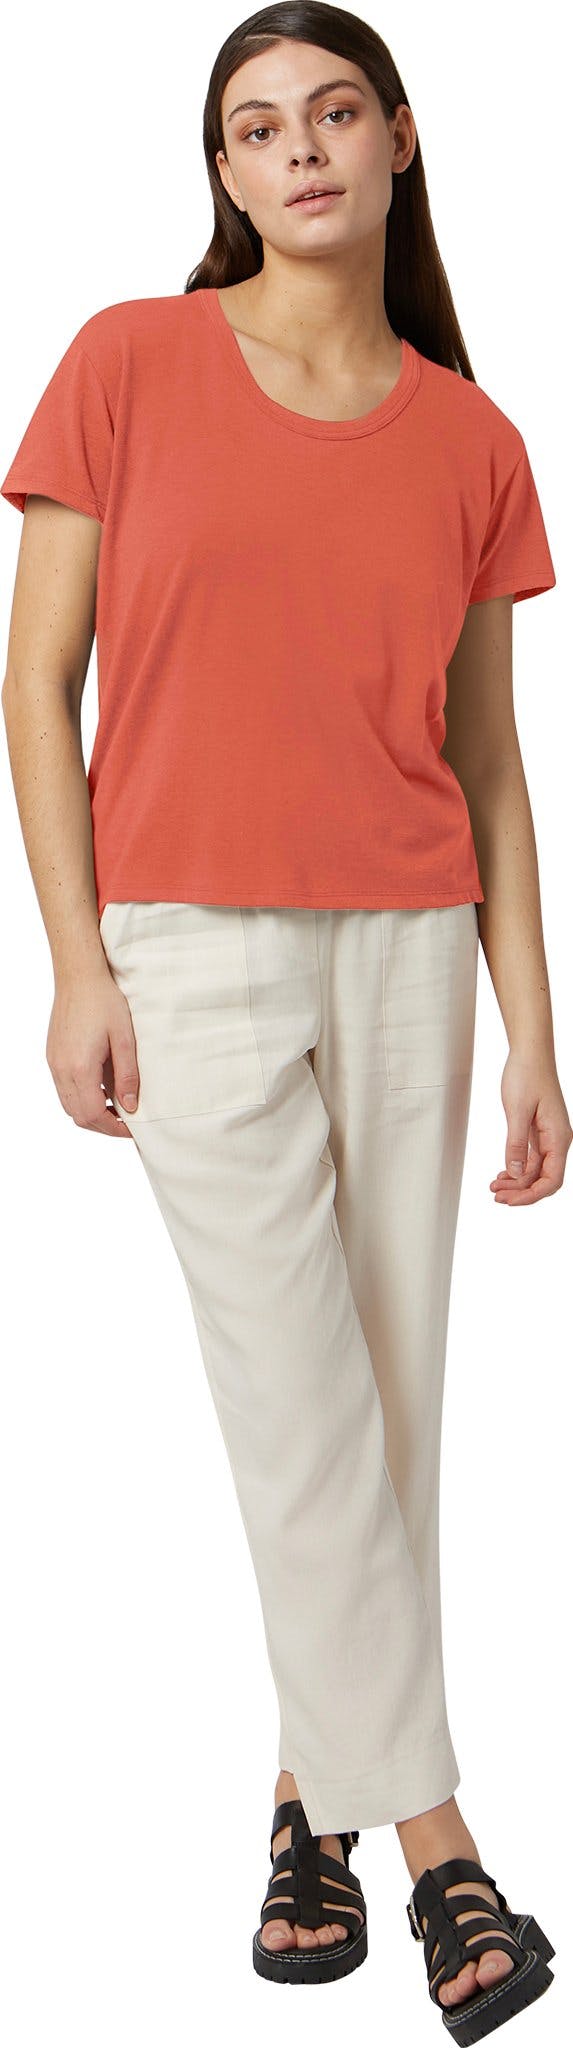 Product image for Murphy Top - Women's